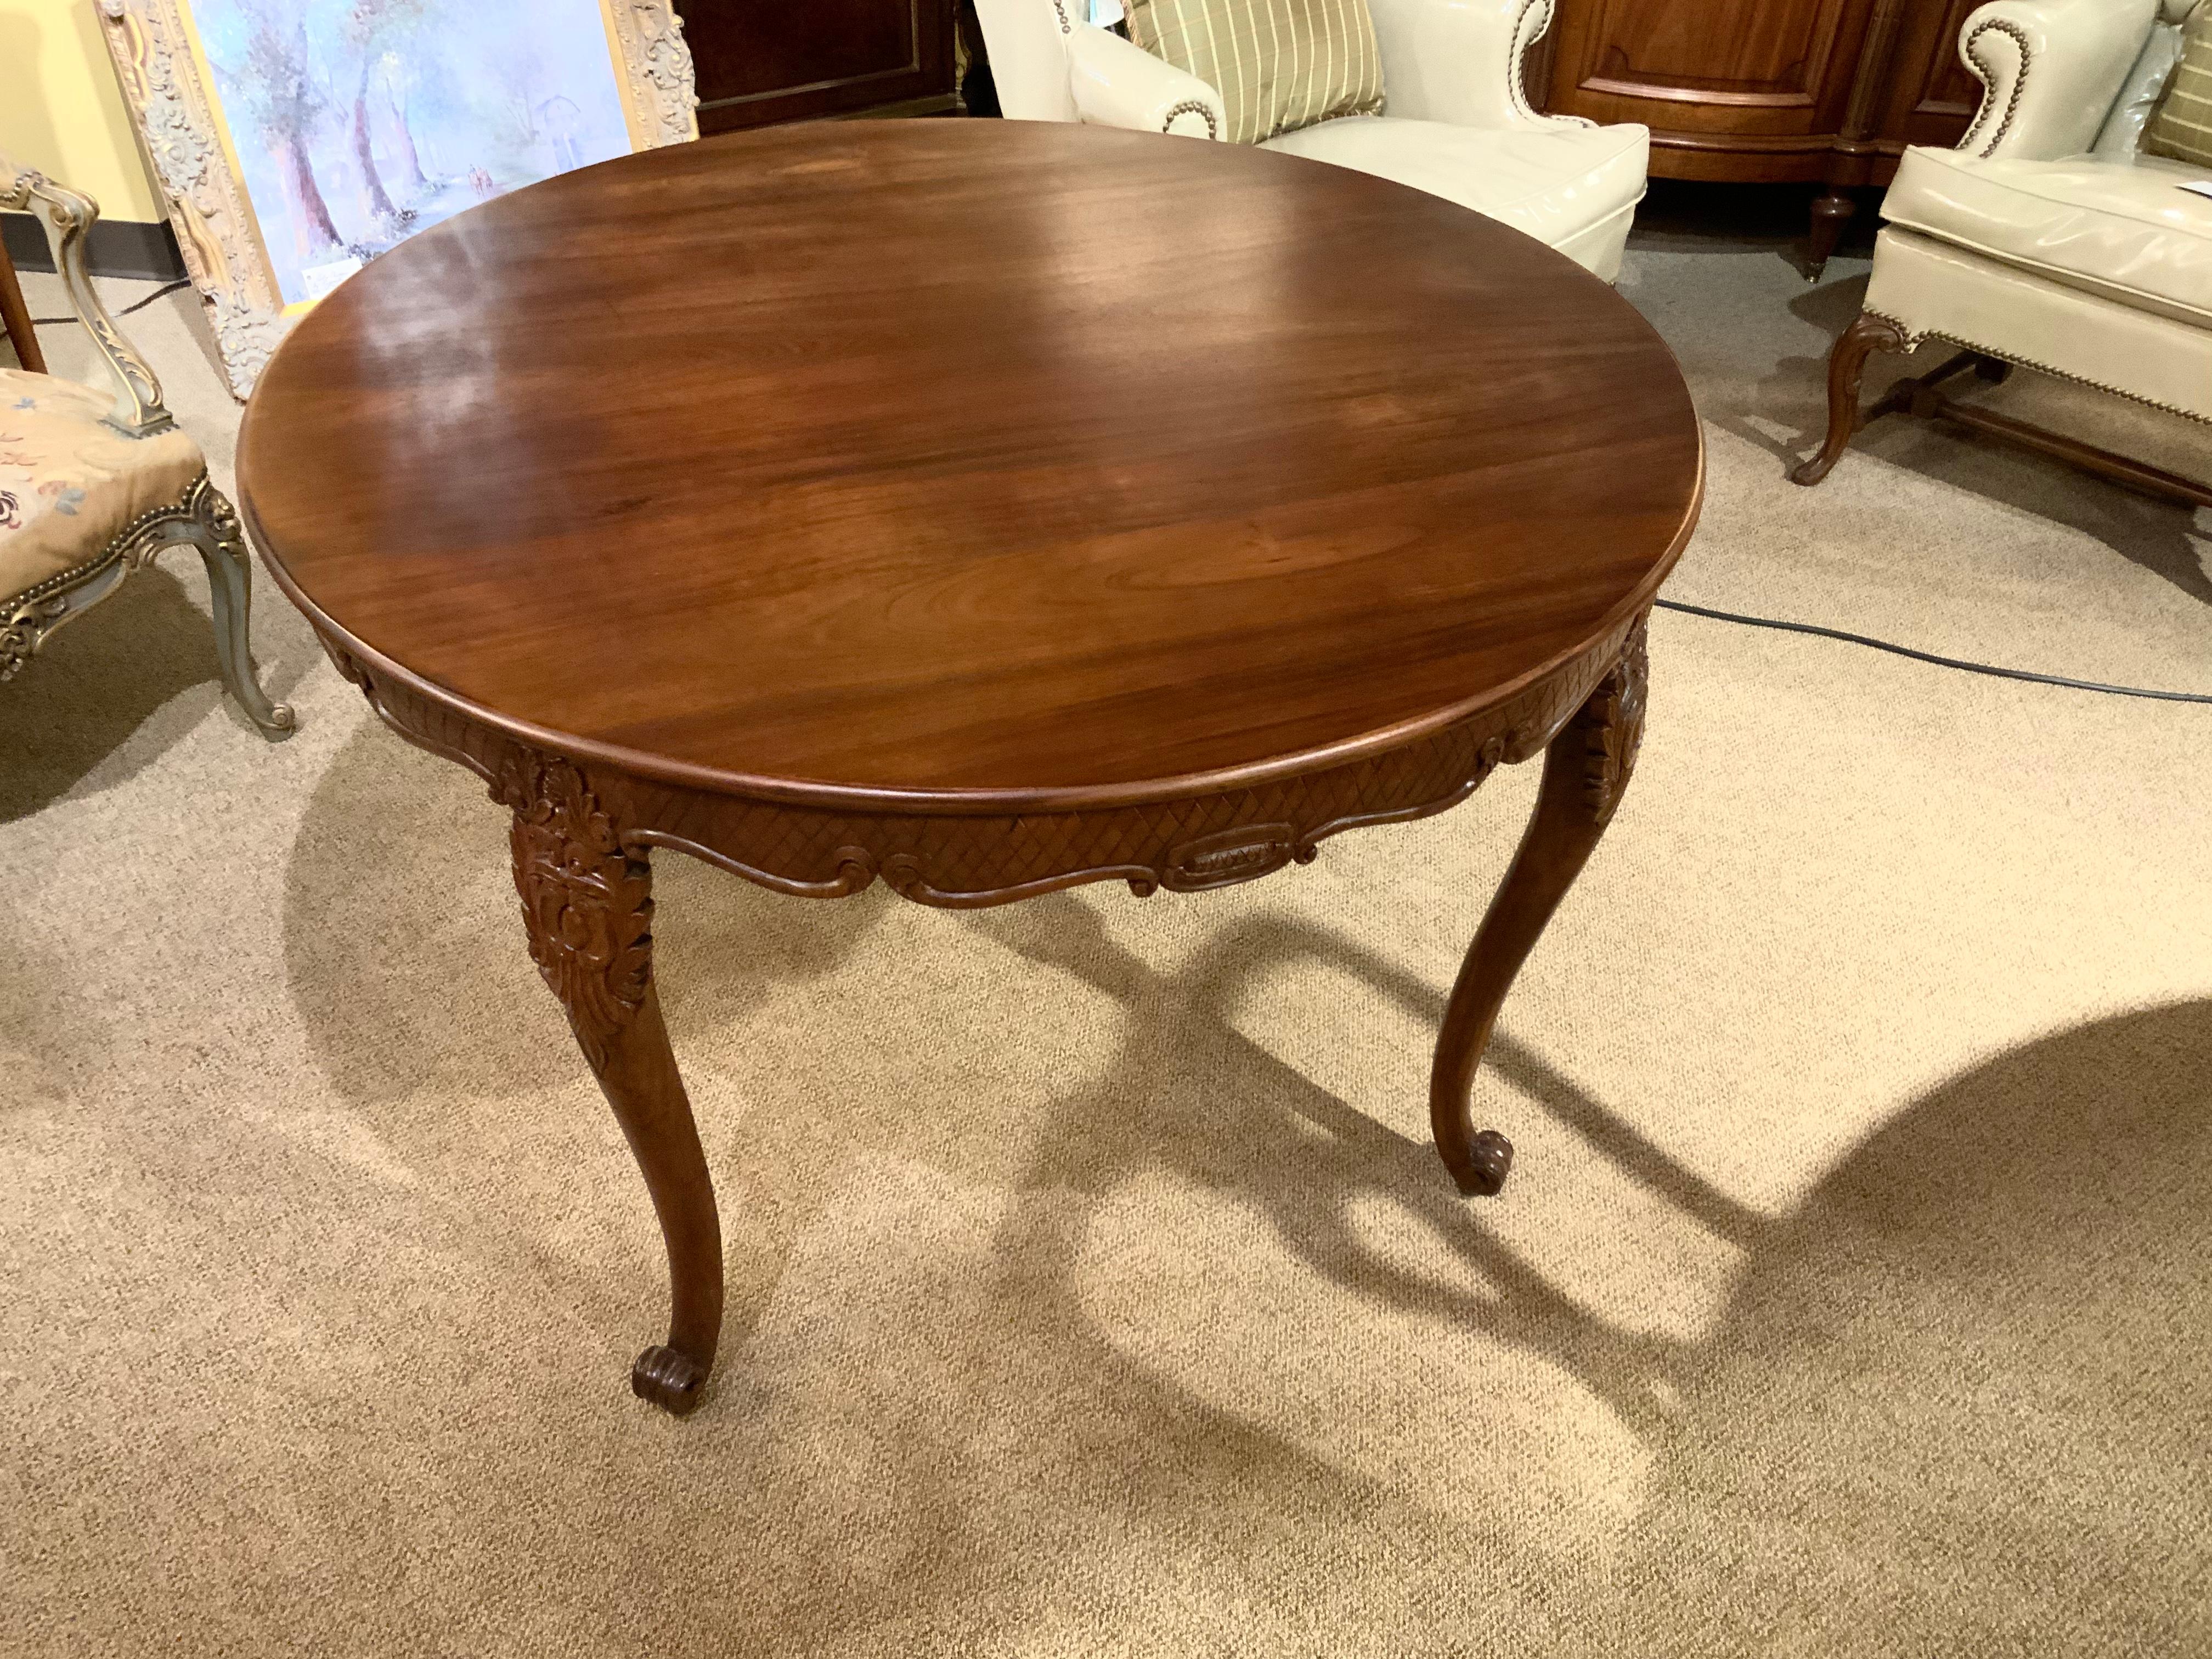 Round Louis V style dining table that has a new finish.
Carved apron with a scalloped shape that has geometric 
Carvings. The legs are gracefully curved and carved with
A lovely design at the top of the leg. The leg ends in
A curled foot. This